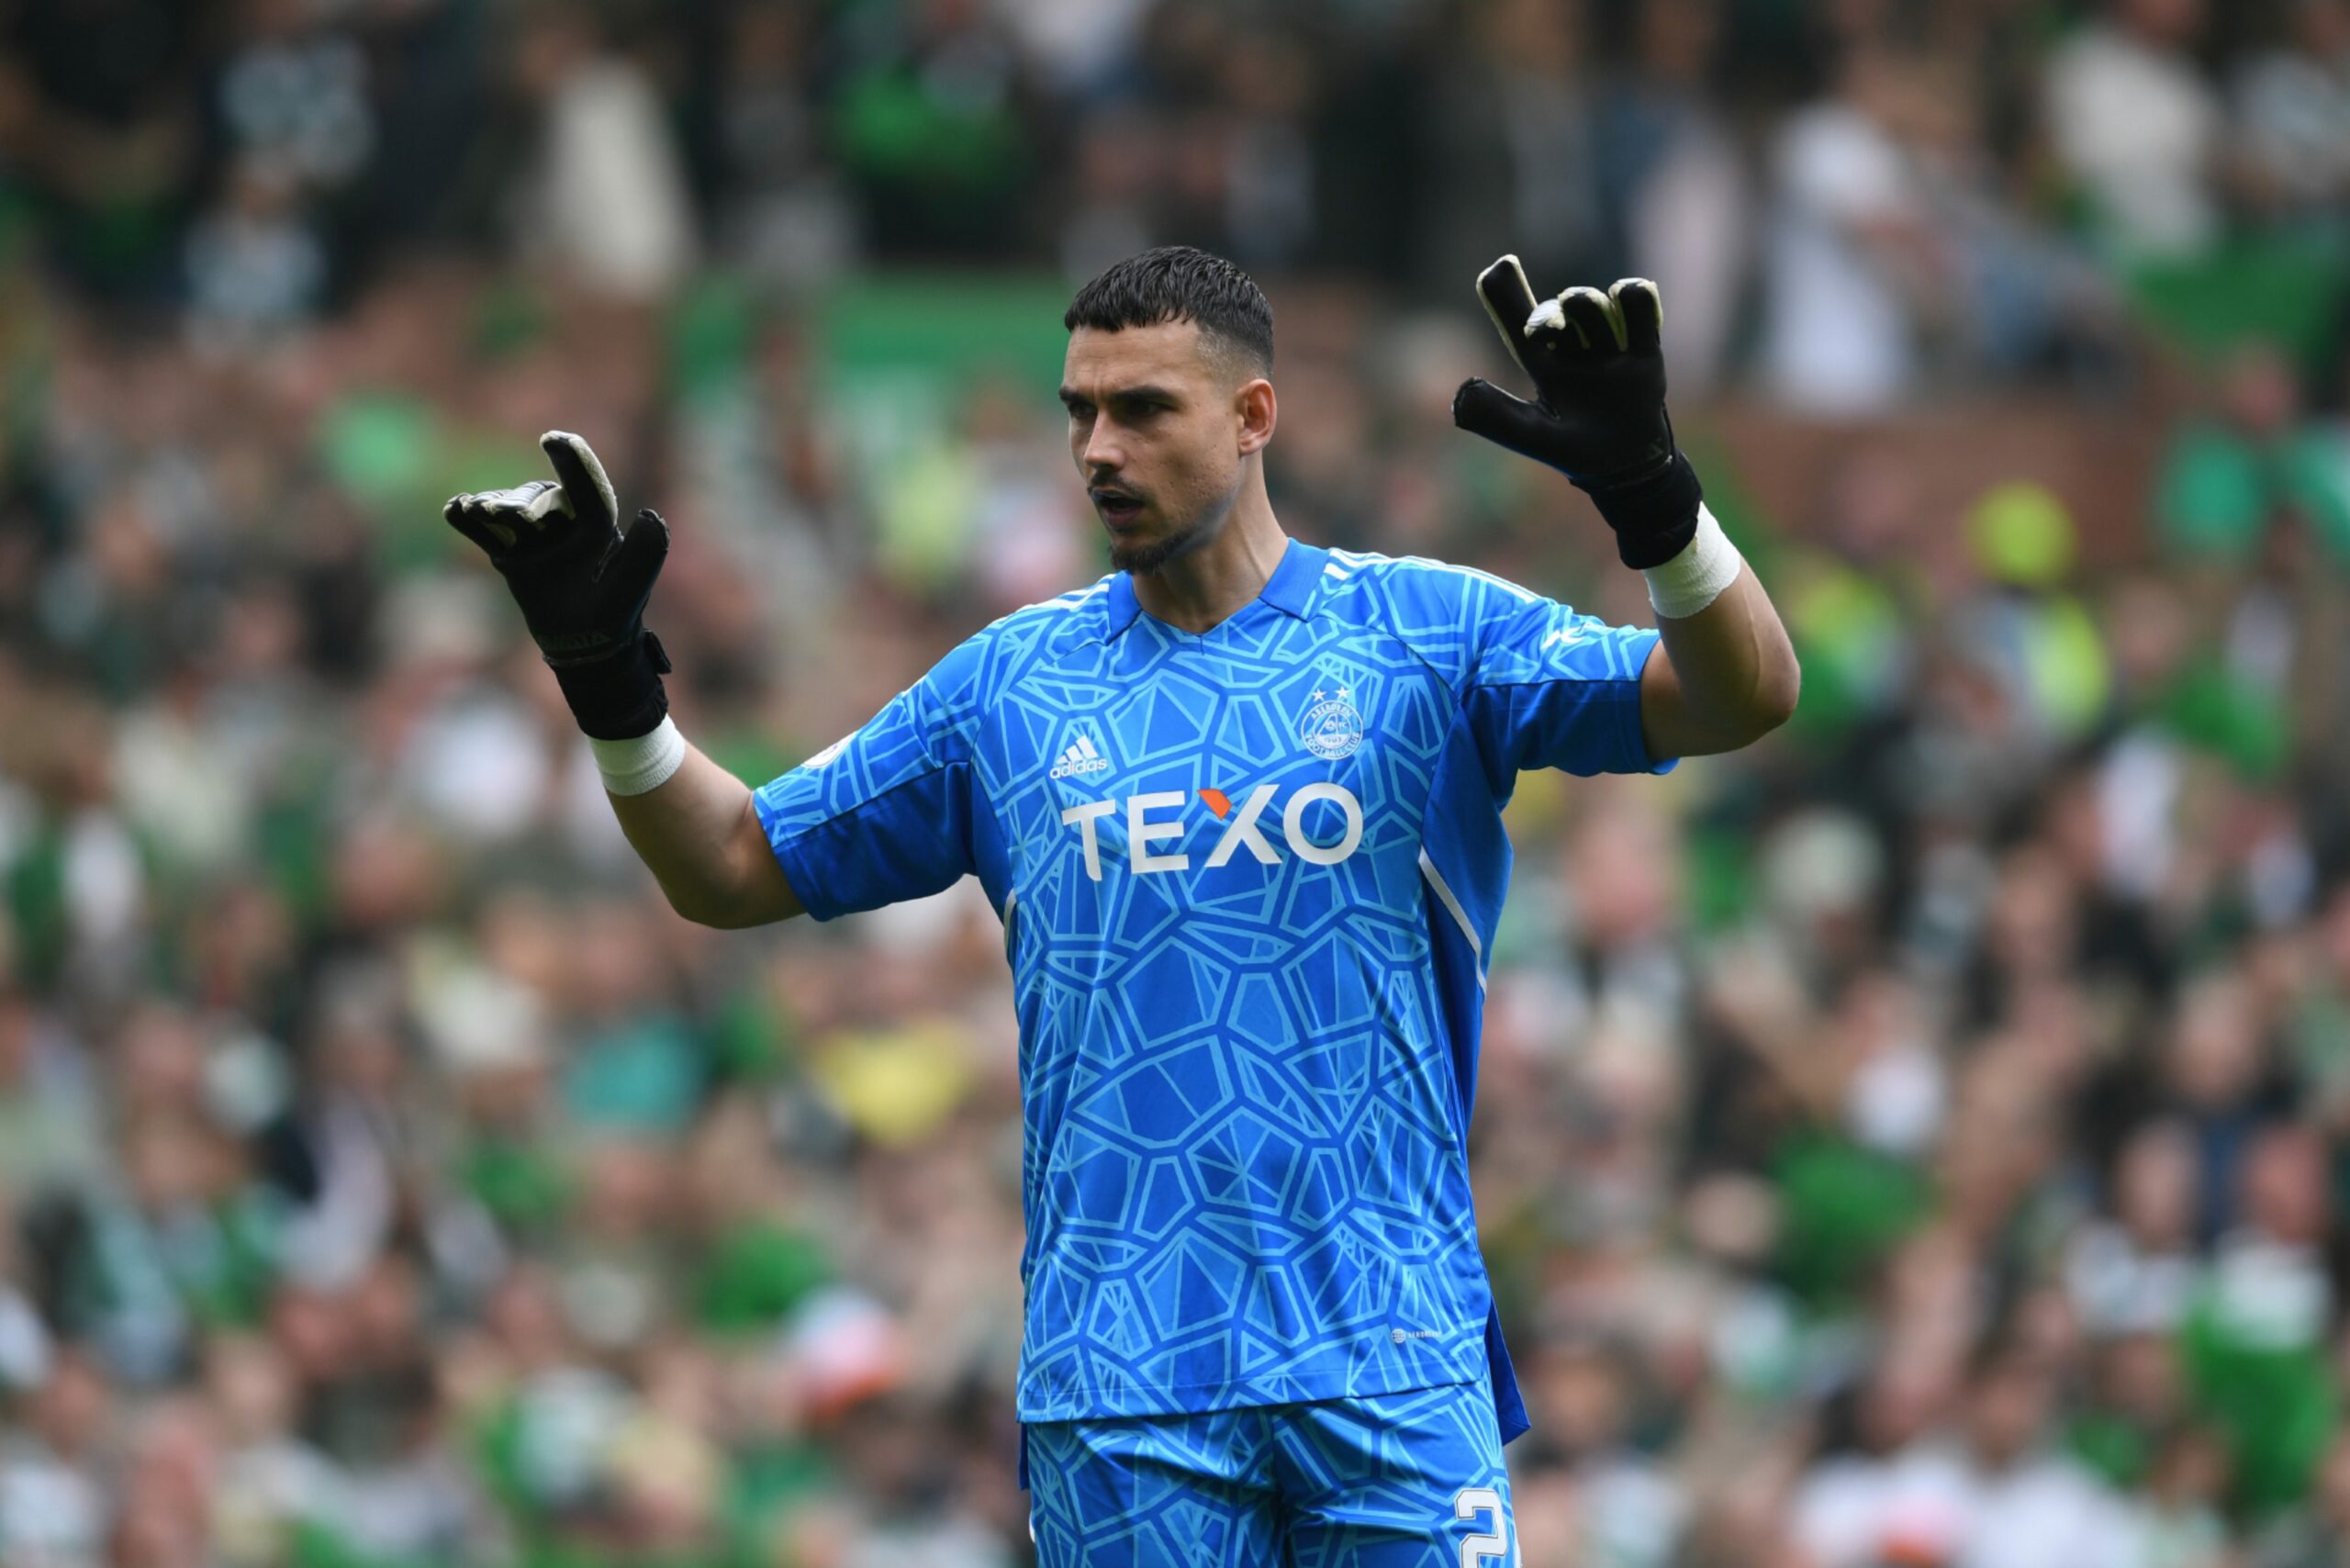 Aberdeen goalkeeper Kelle Roos during the 5-0 loss at Celtic.